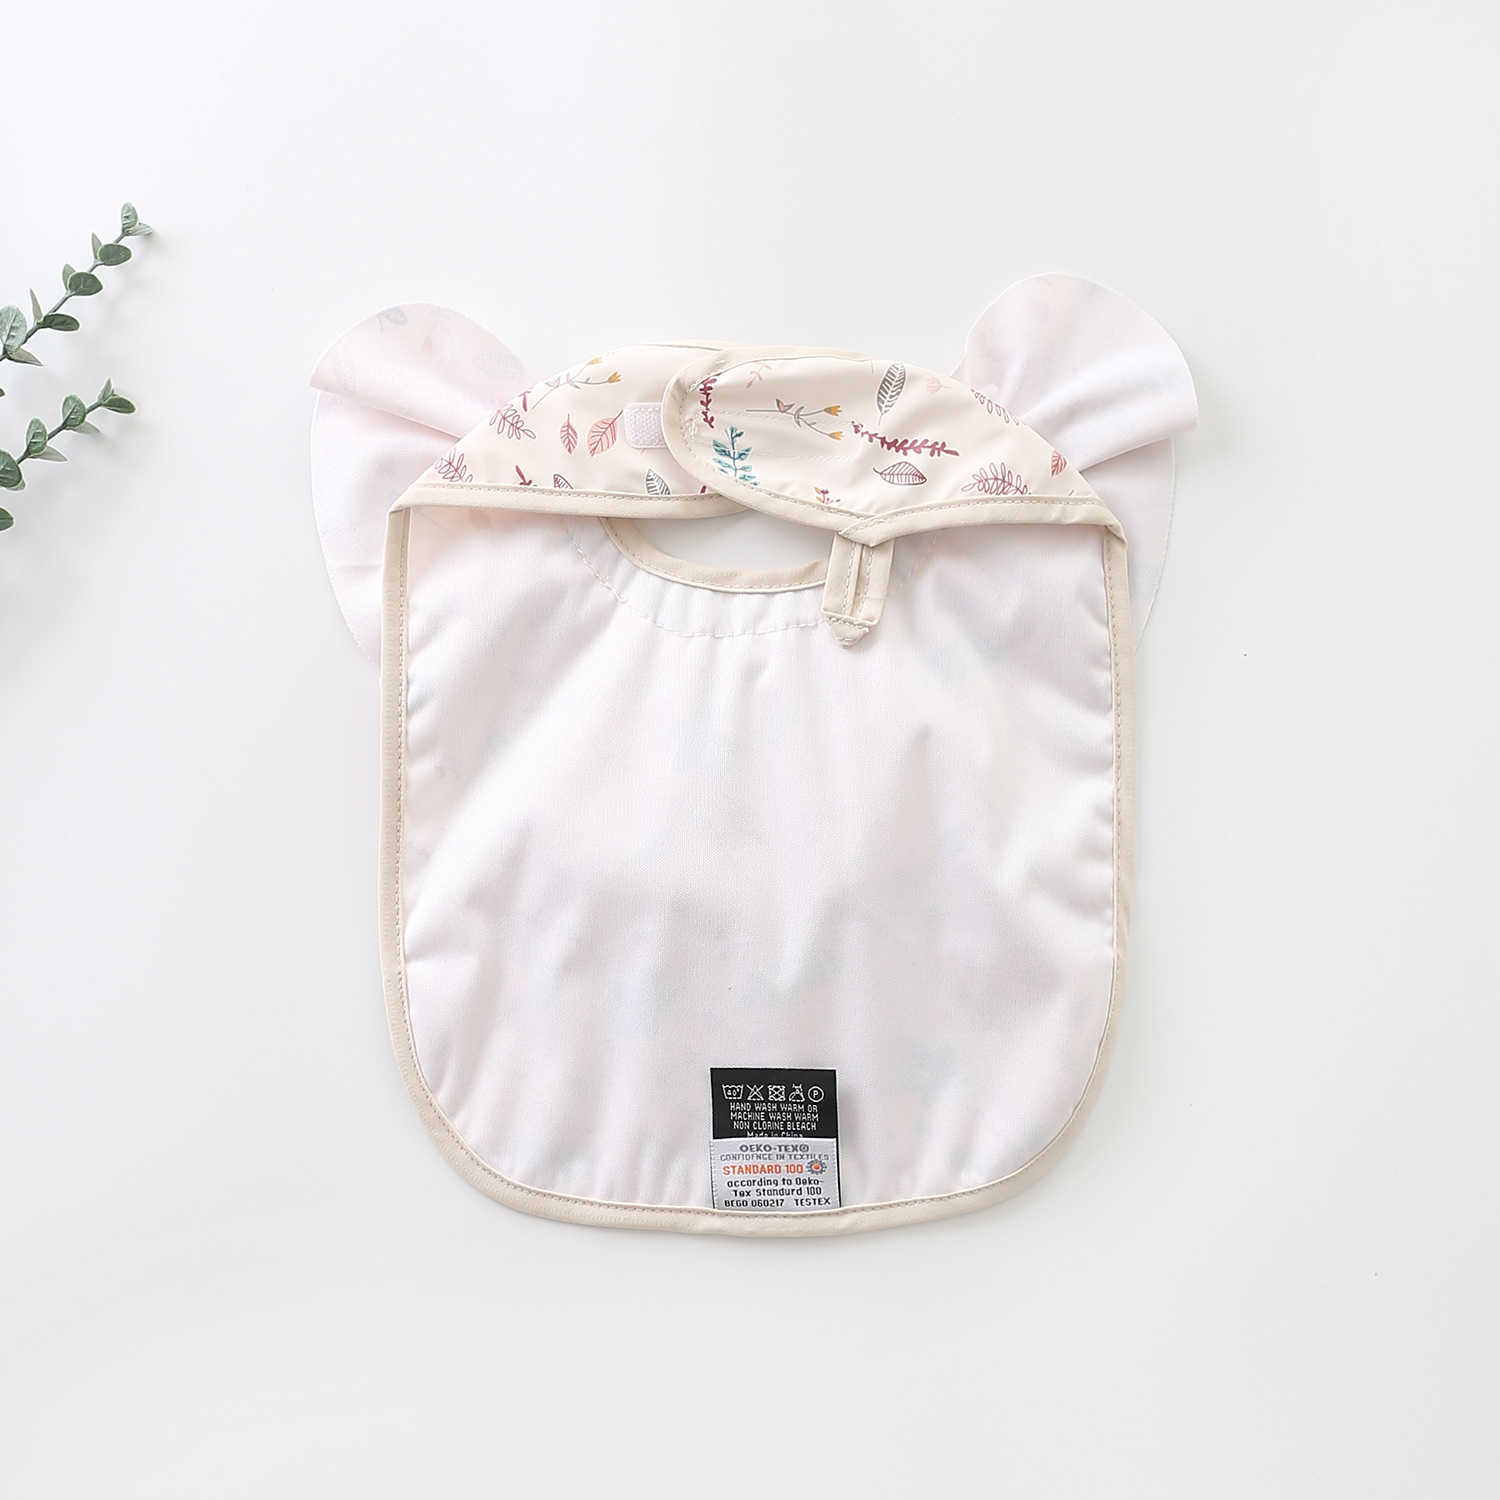 Bibs Burp Cloths Baby feeding waterproof children's casual clothing baby food apron Long sleeved bib with pockets for babies G220605